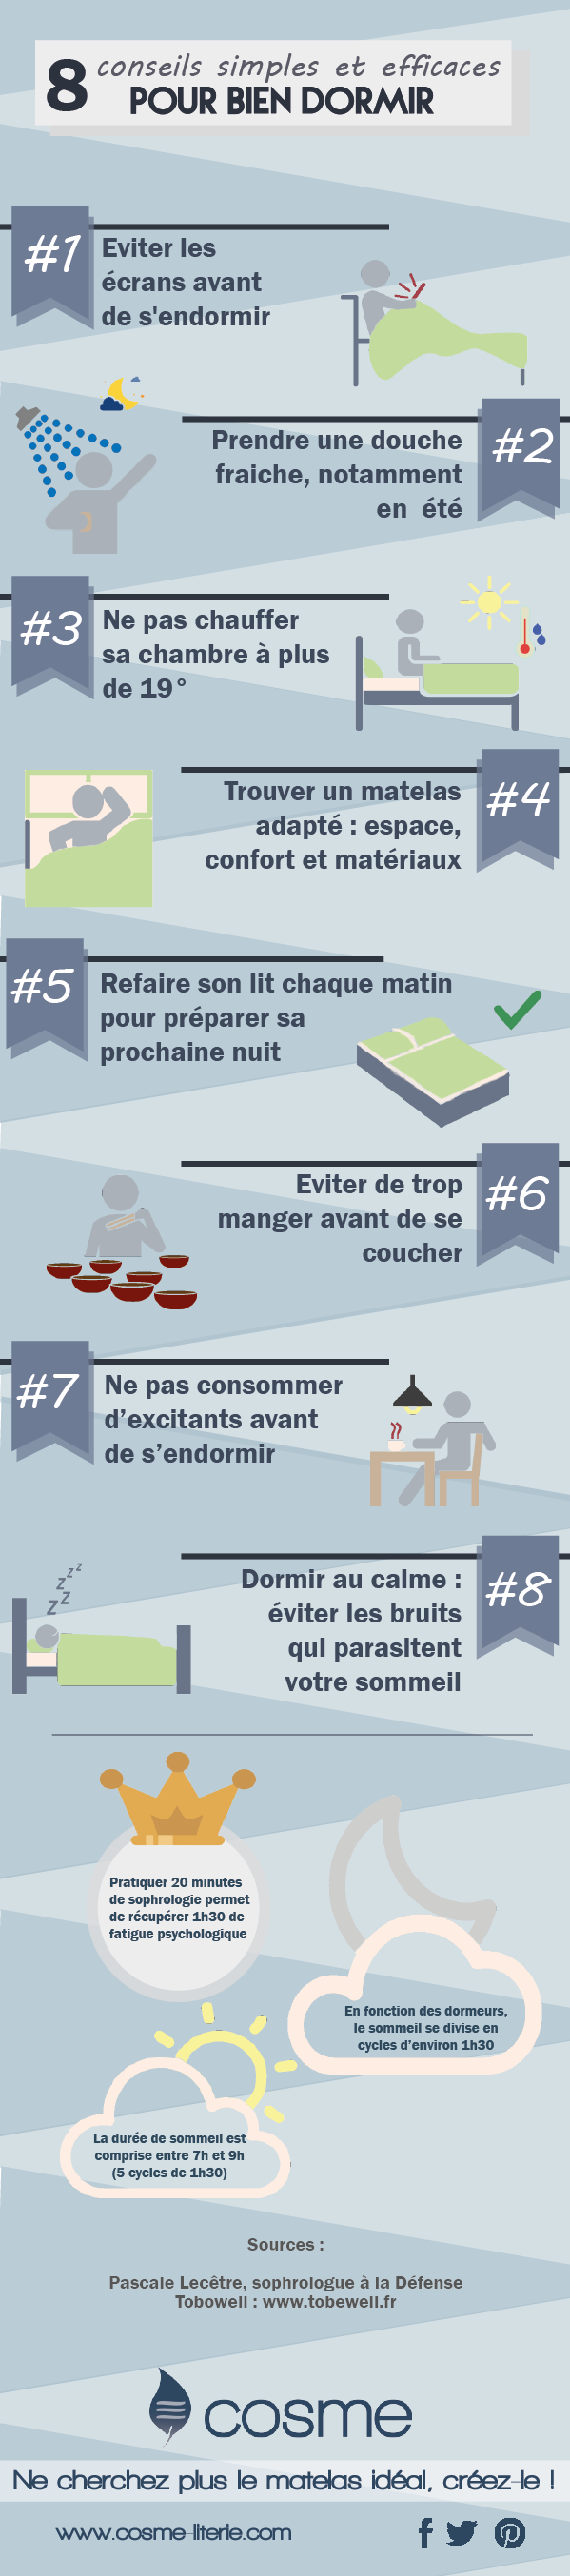 infographie-cosme literie.png